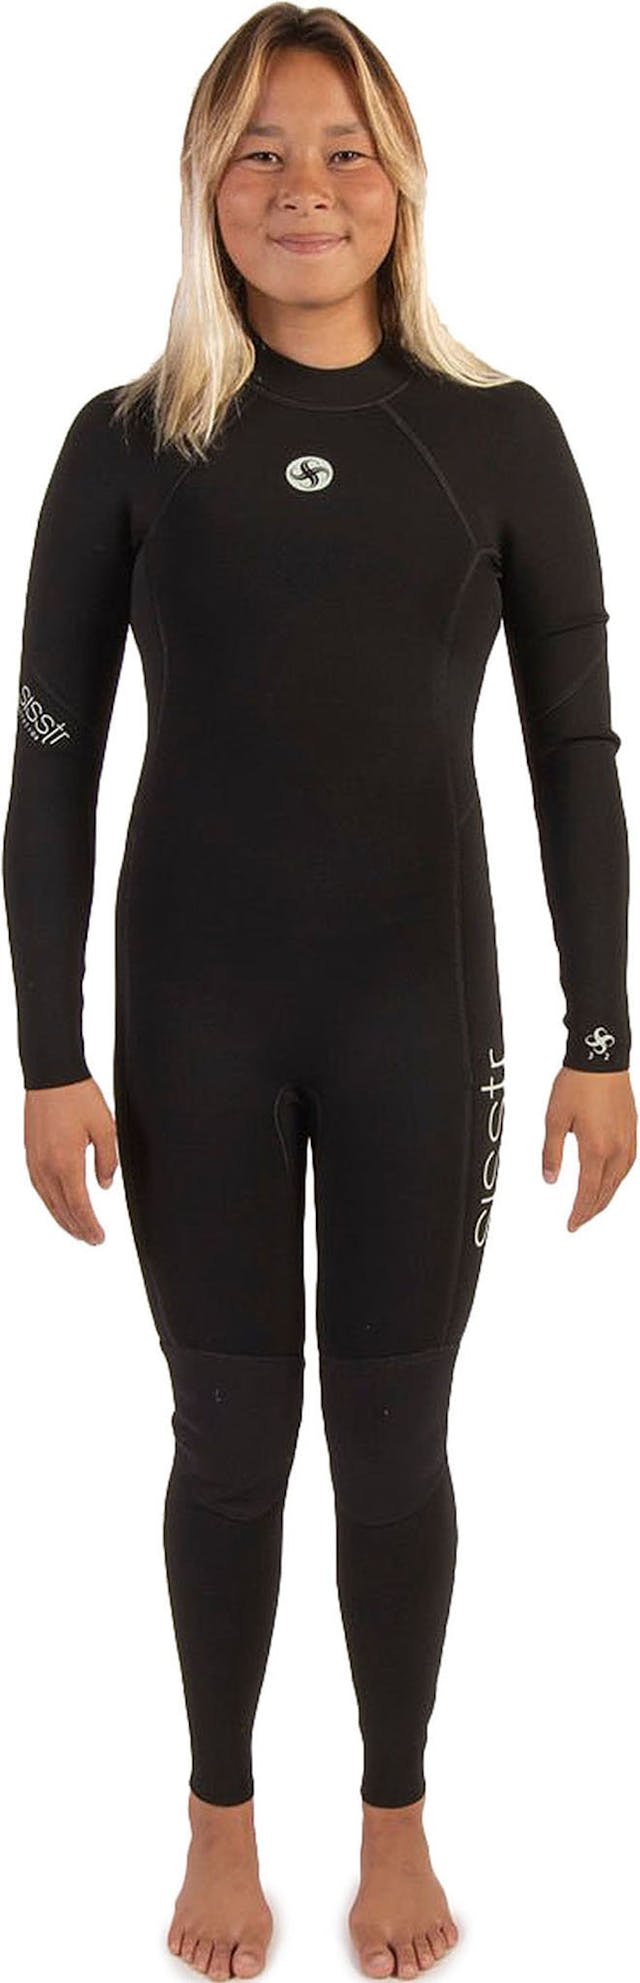 Product image for Seven Seas 3/2 Back Zip Full Wetsuit - Youth